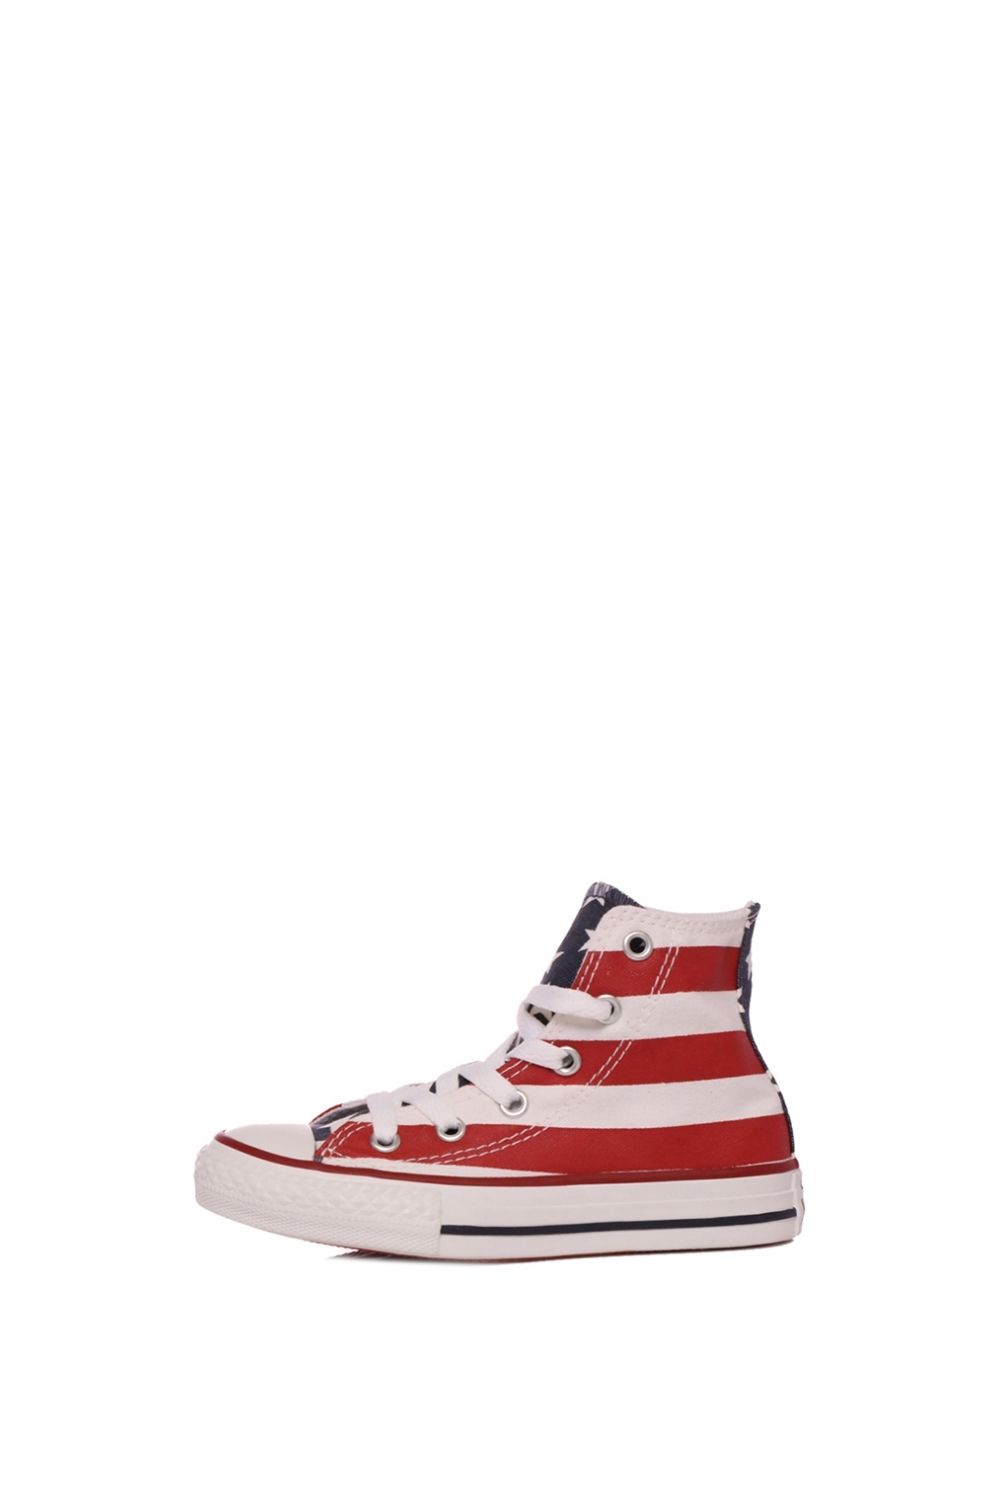 CONVERSE – Παιδικα ψηλα sneakers Chuck Taylor All Star Hi λευκα κοκκινα